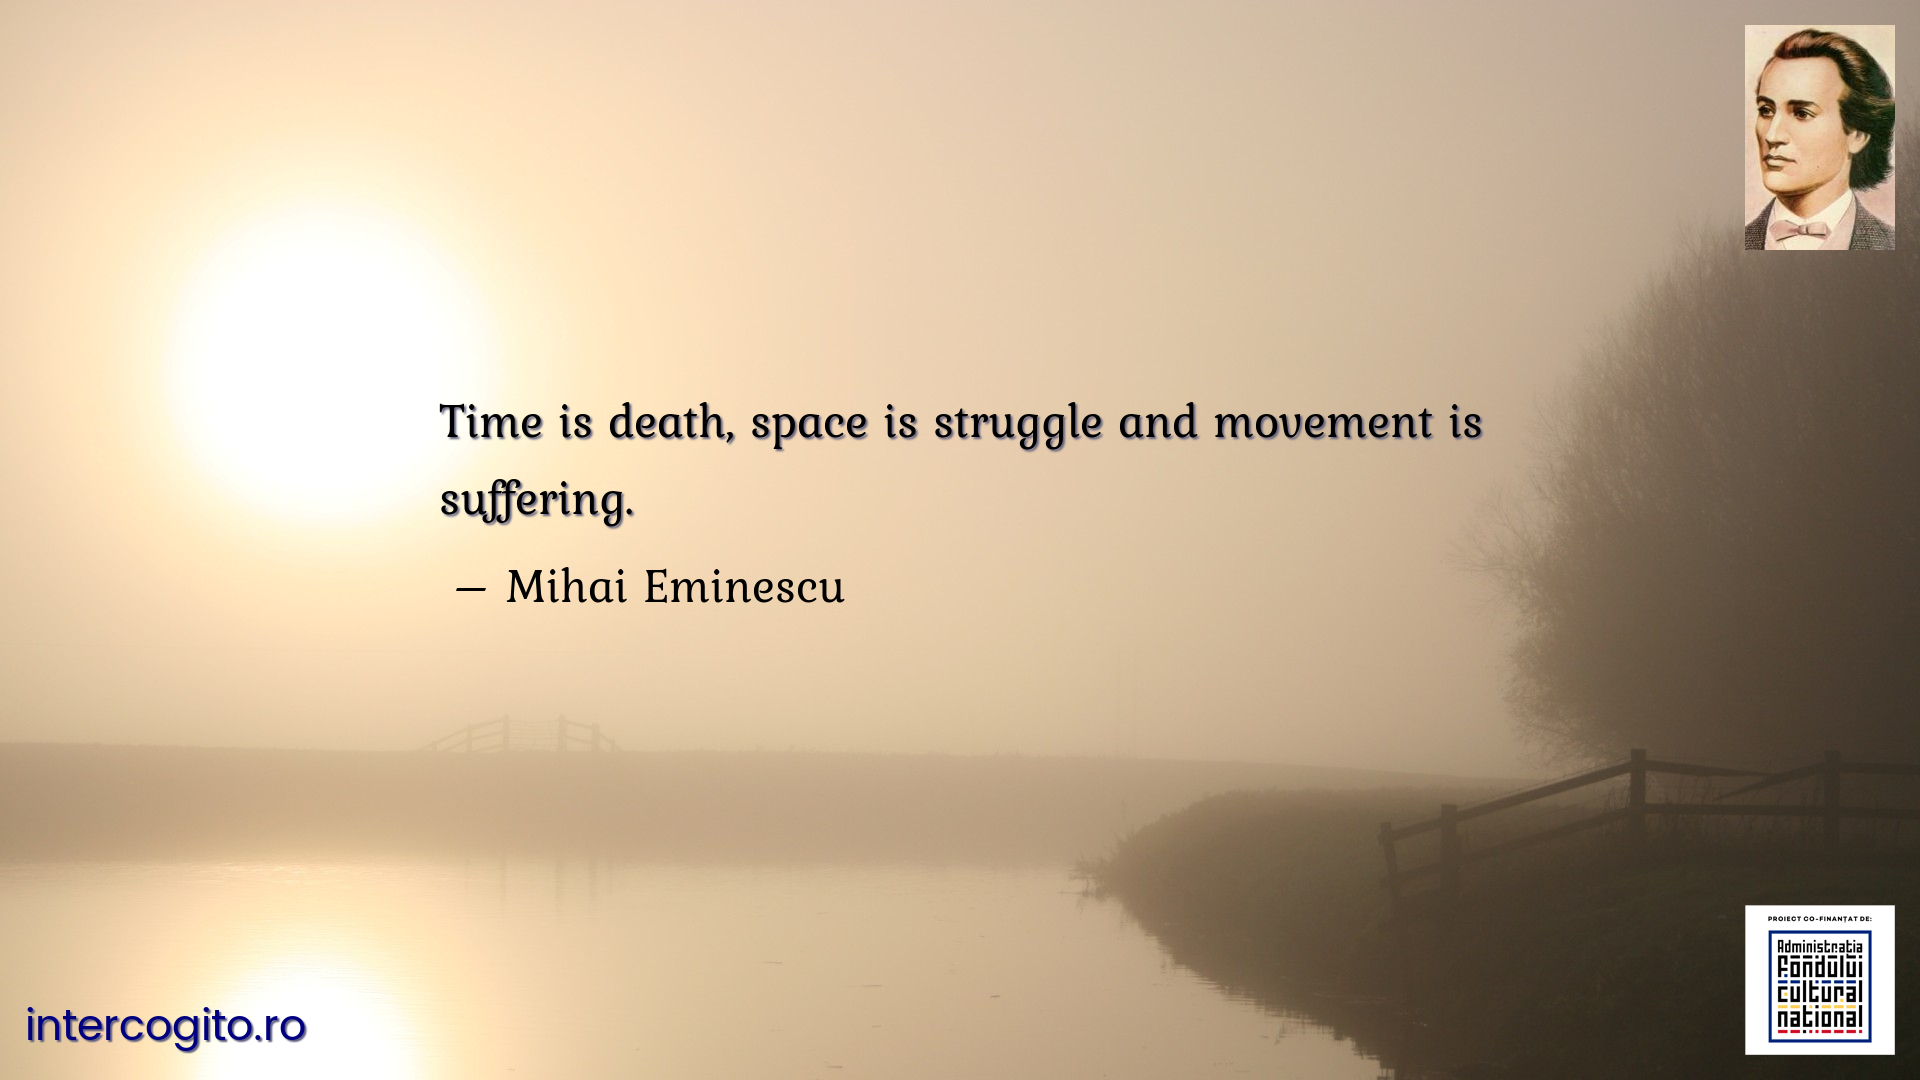 Time is death, space is struggle and movement is suffering.